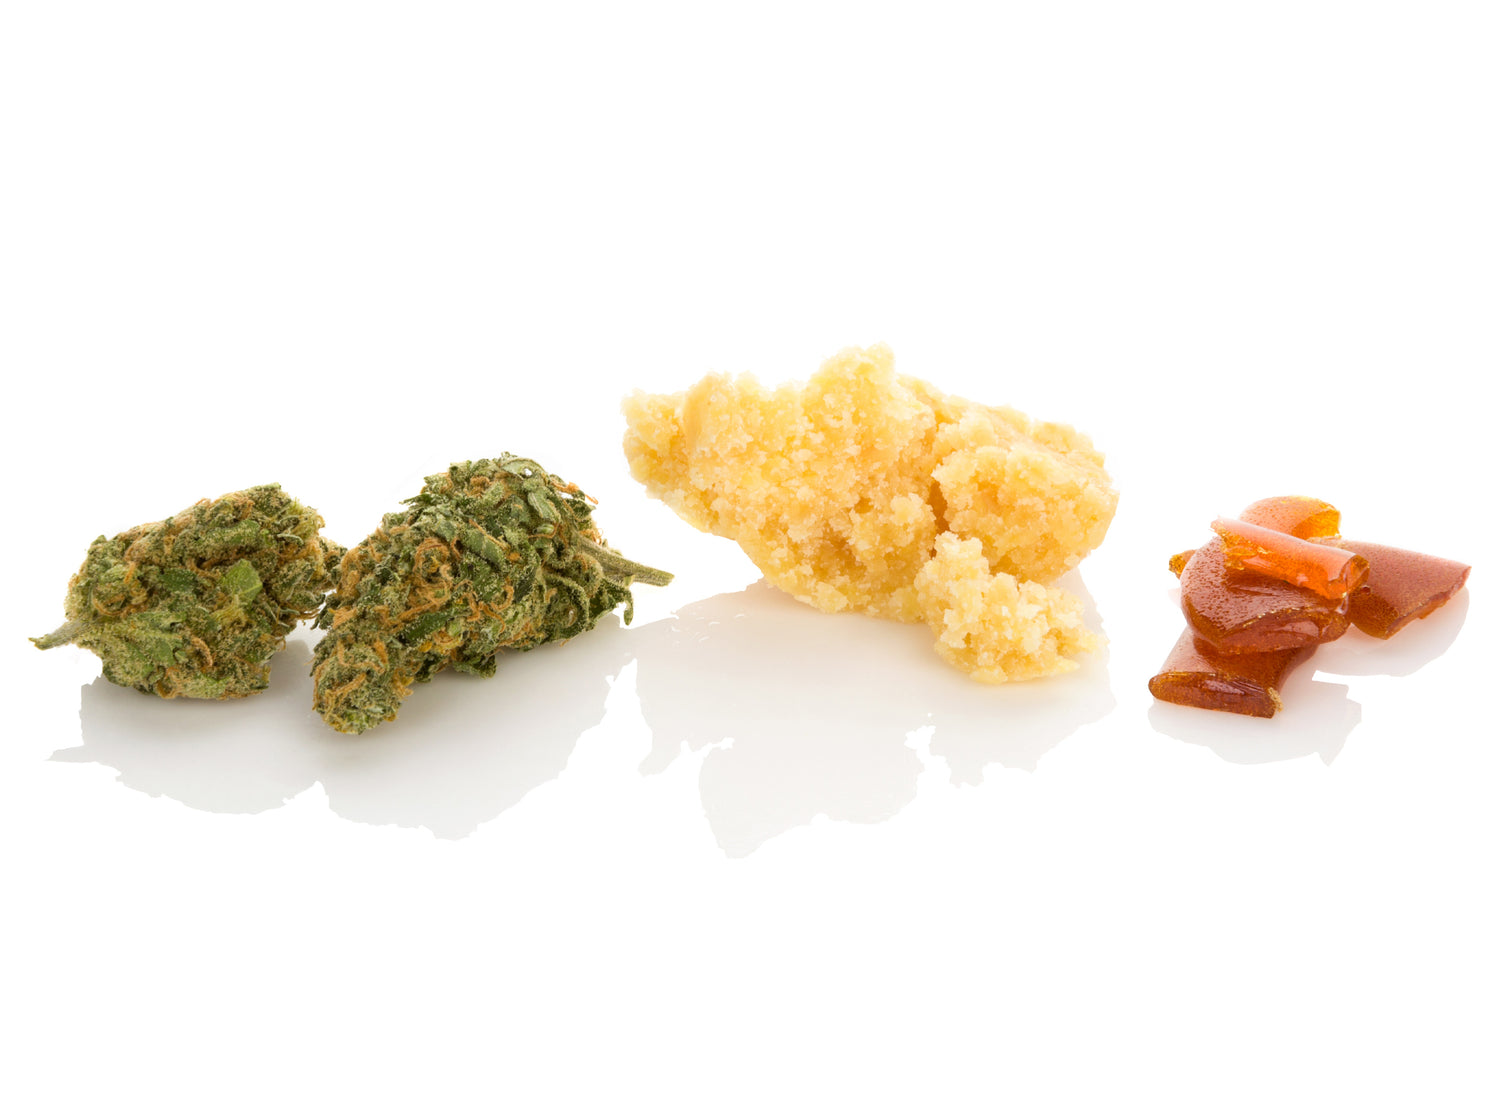 What Are Concentrates and How Are They Made?